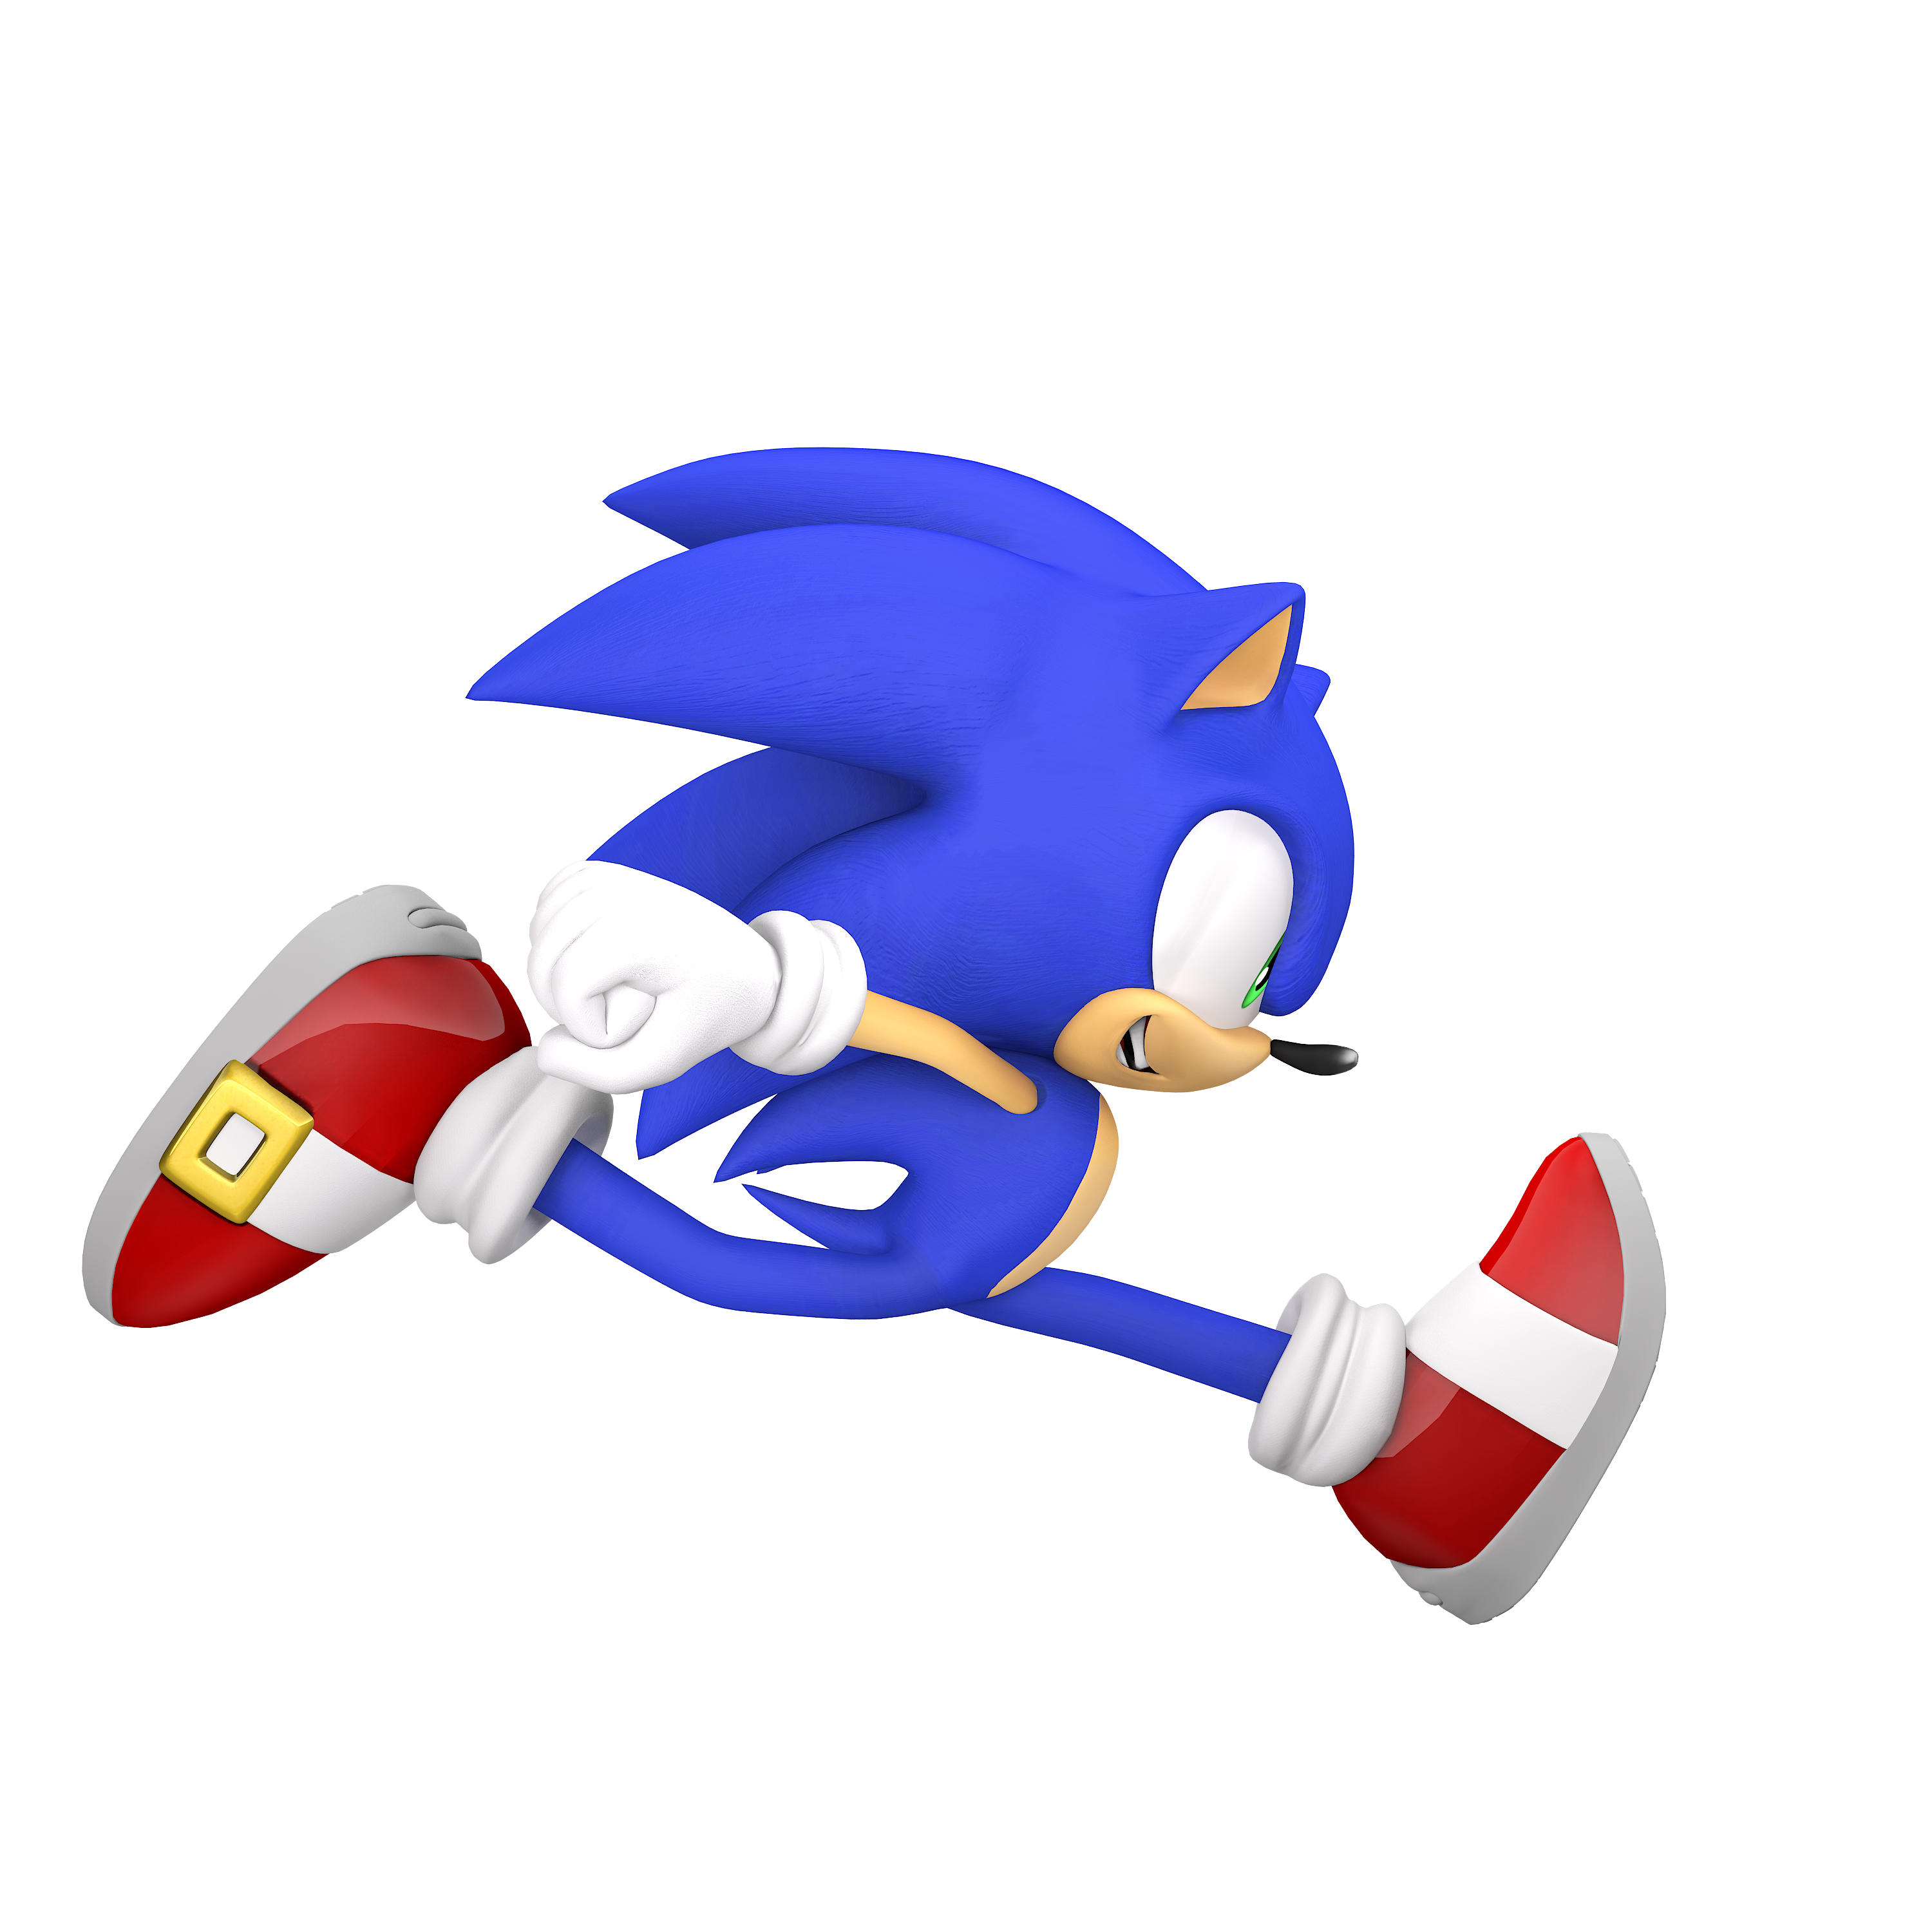 Sonic runners by cyberphonic. Fast clipart fast runner